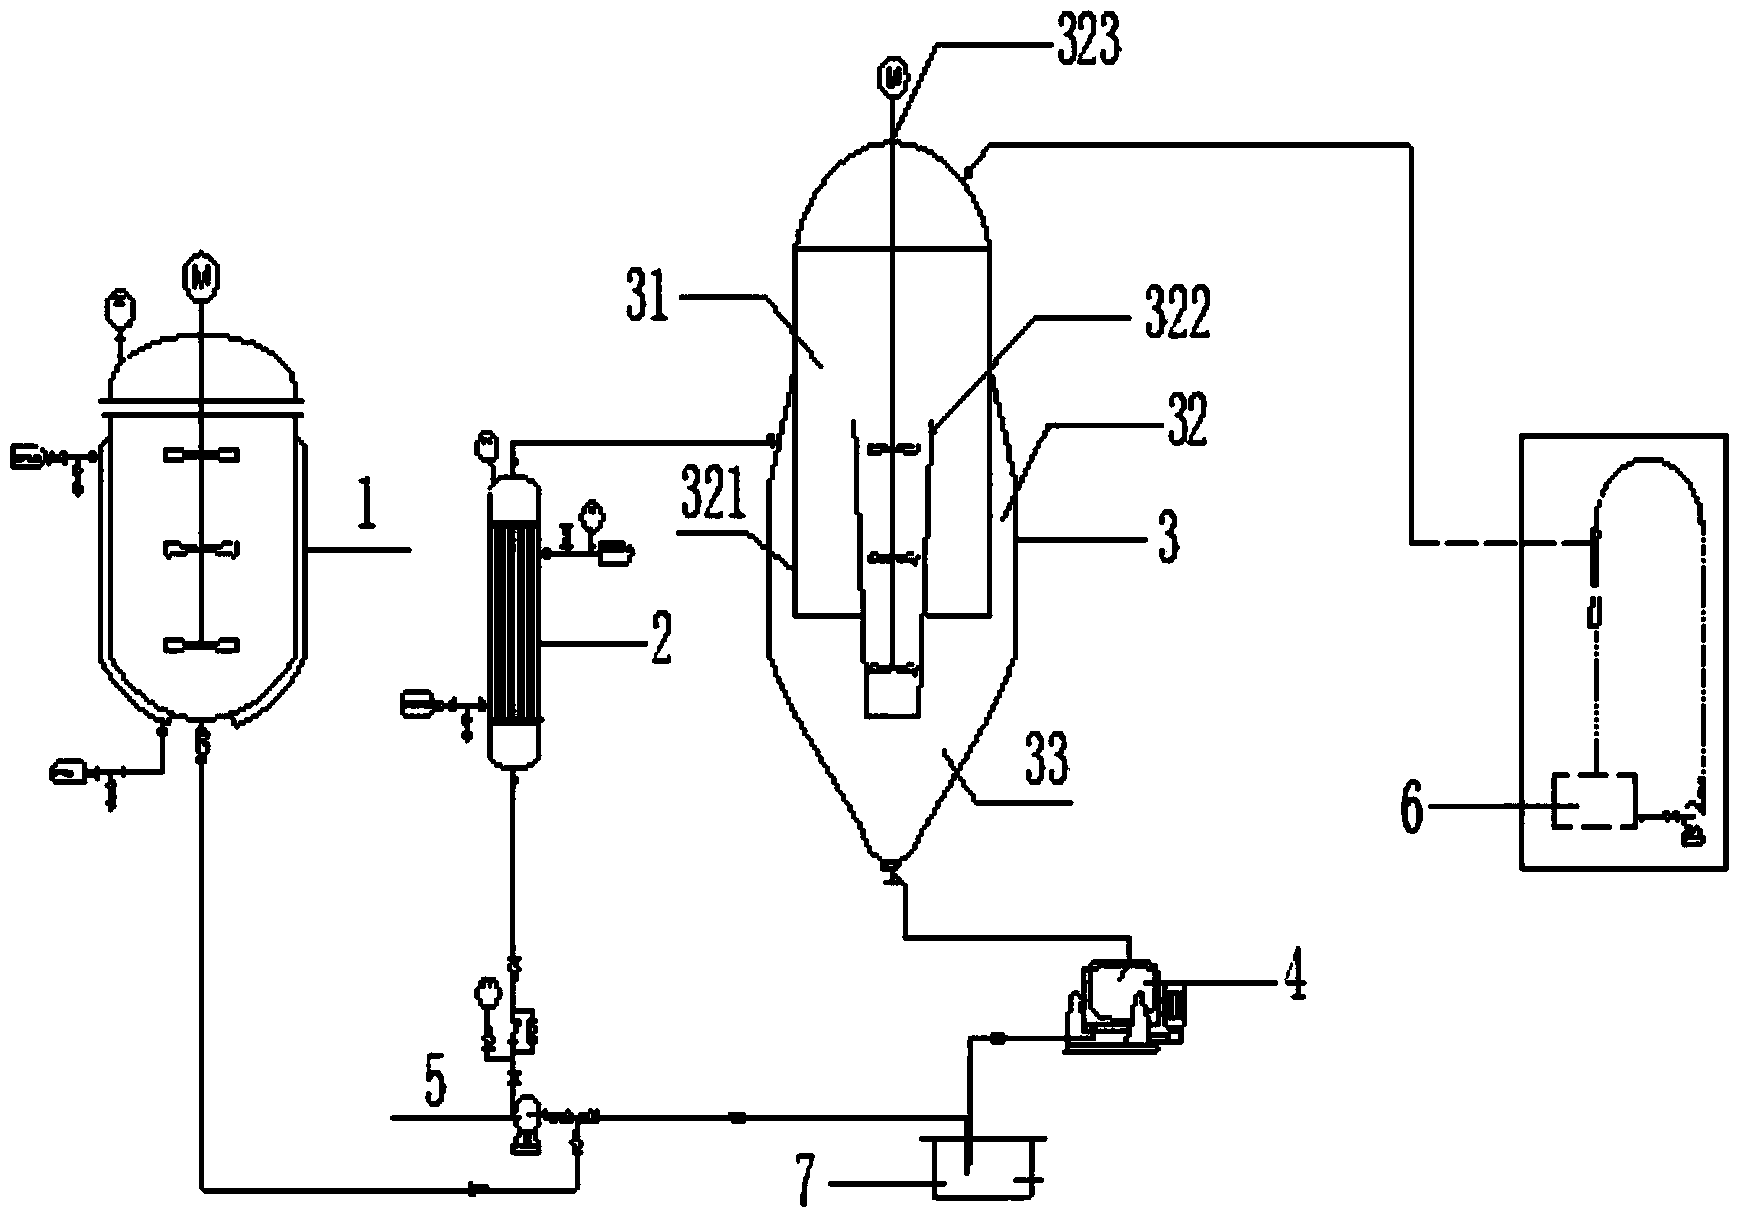 Continuous crystallizing and centrifuging system for producing phosphorous acid